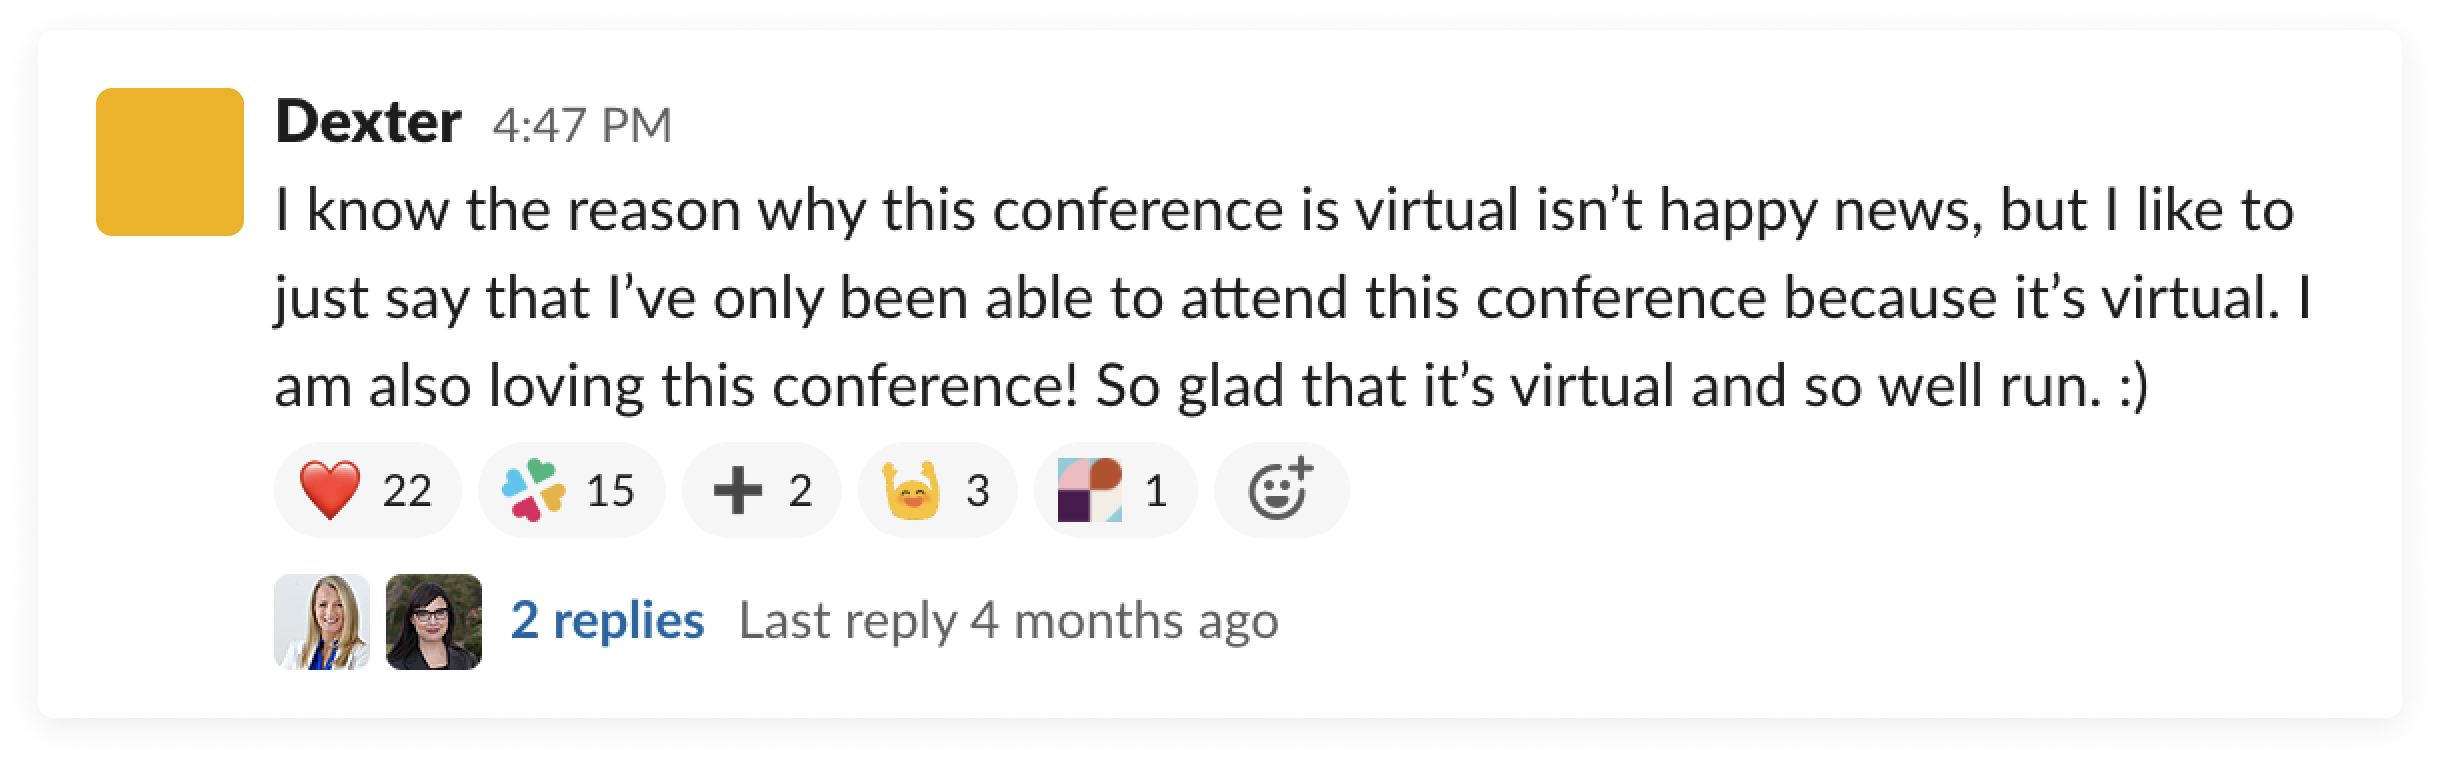 A attendee posts in the Frontiers workspace that he finds the event well-run and enjoyable